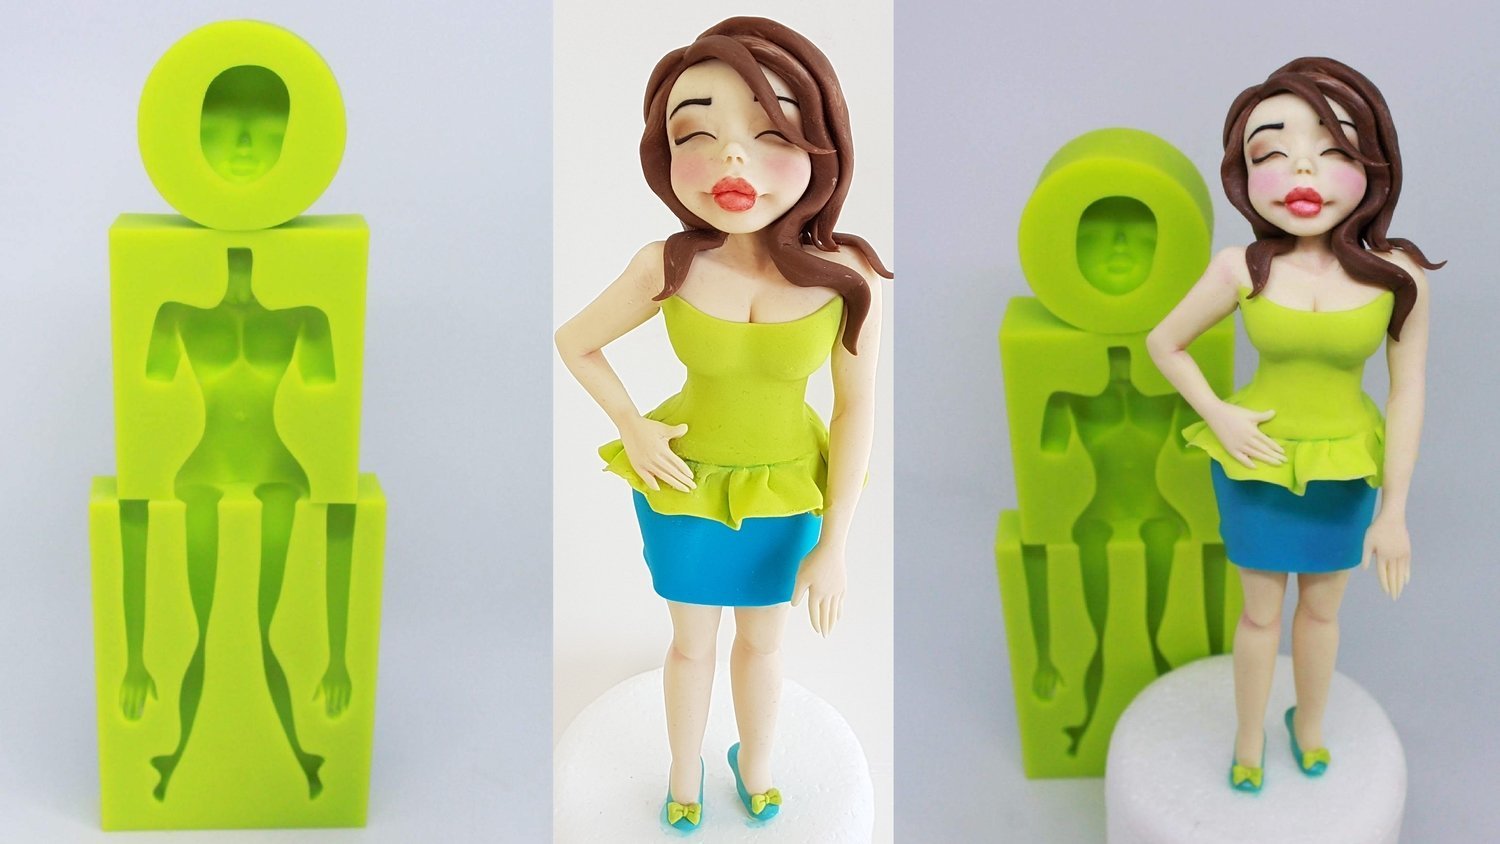 Woman Face, Body, Legs & Arm Set By Domy